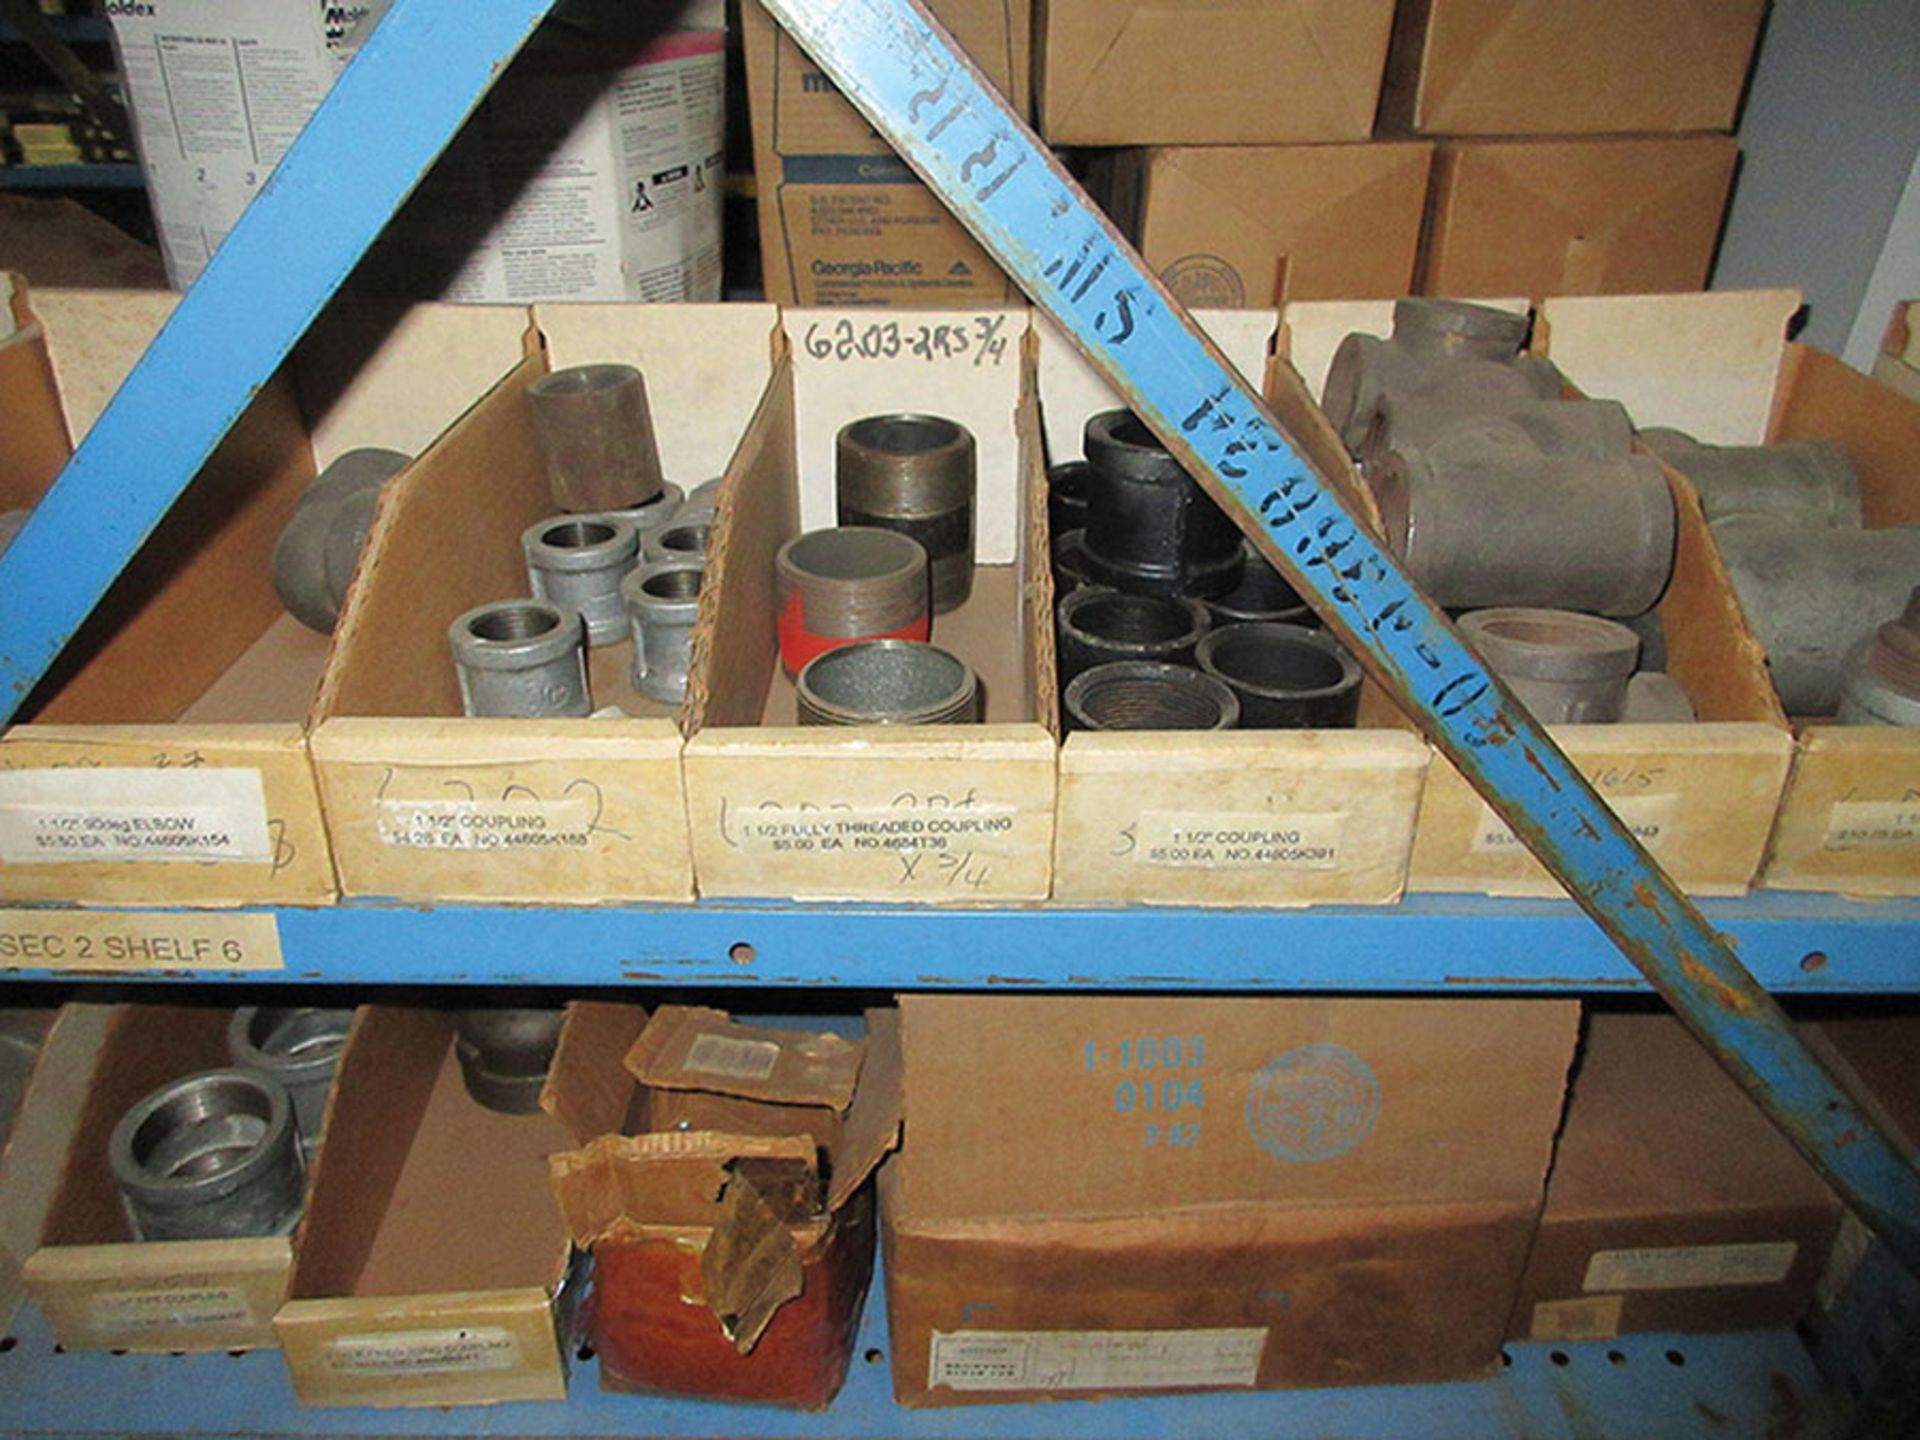 CONTENTS ON LOWER SECTION OF SHELF UNIT: DIE SPRINGS, GATE VALVES, COUPLINGS, UNIONS, AND TEES *** - Image 6 of 8